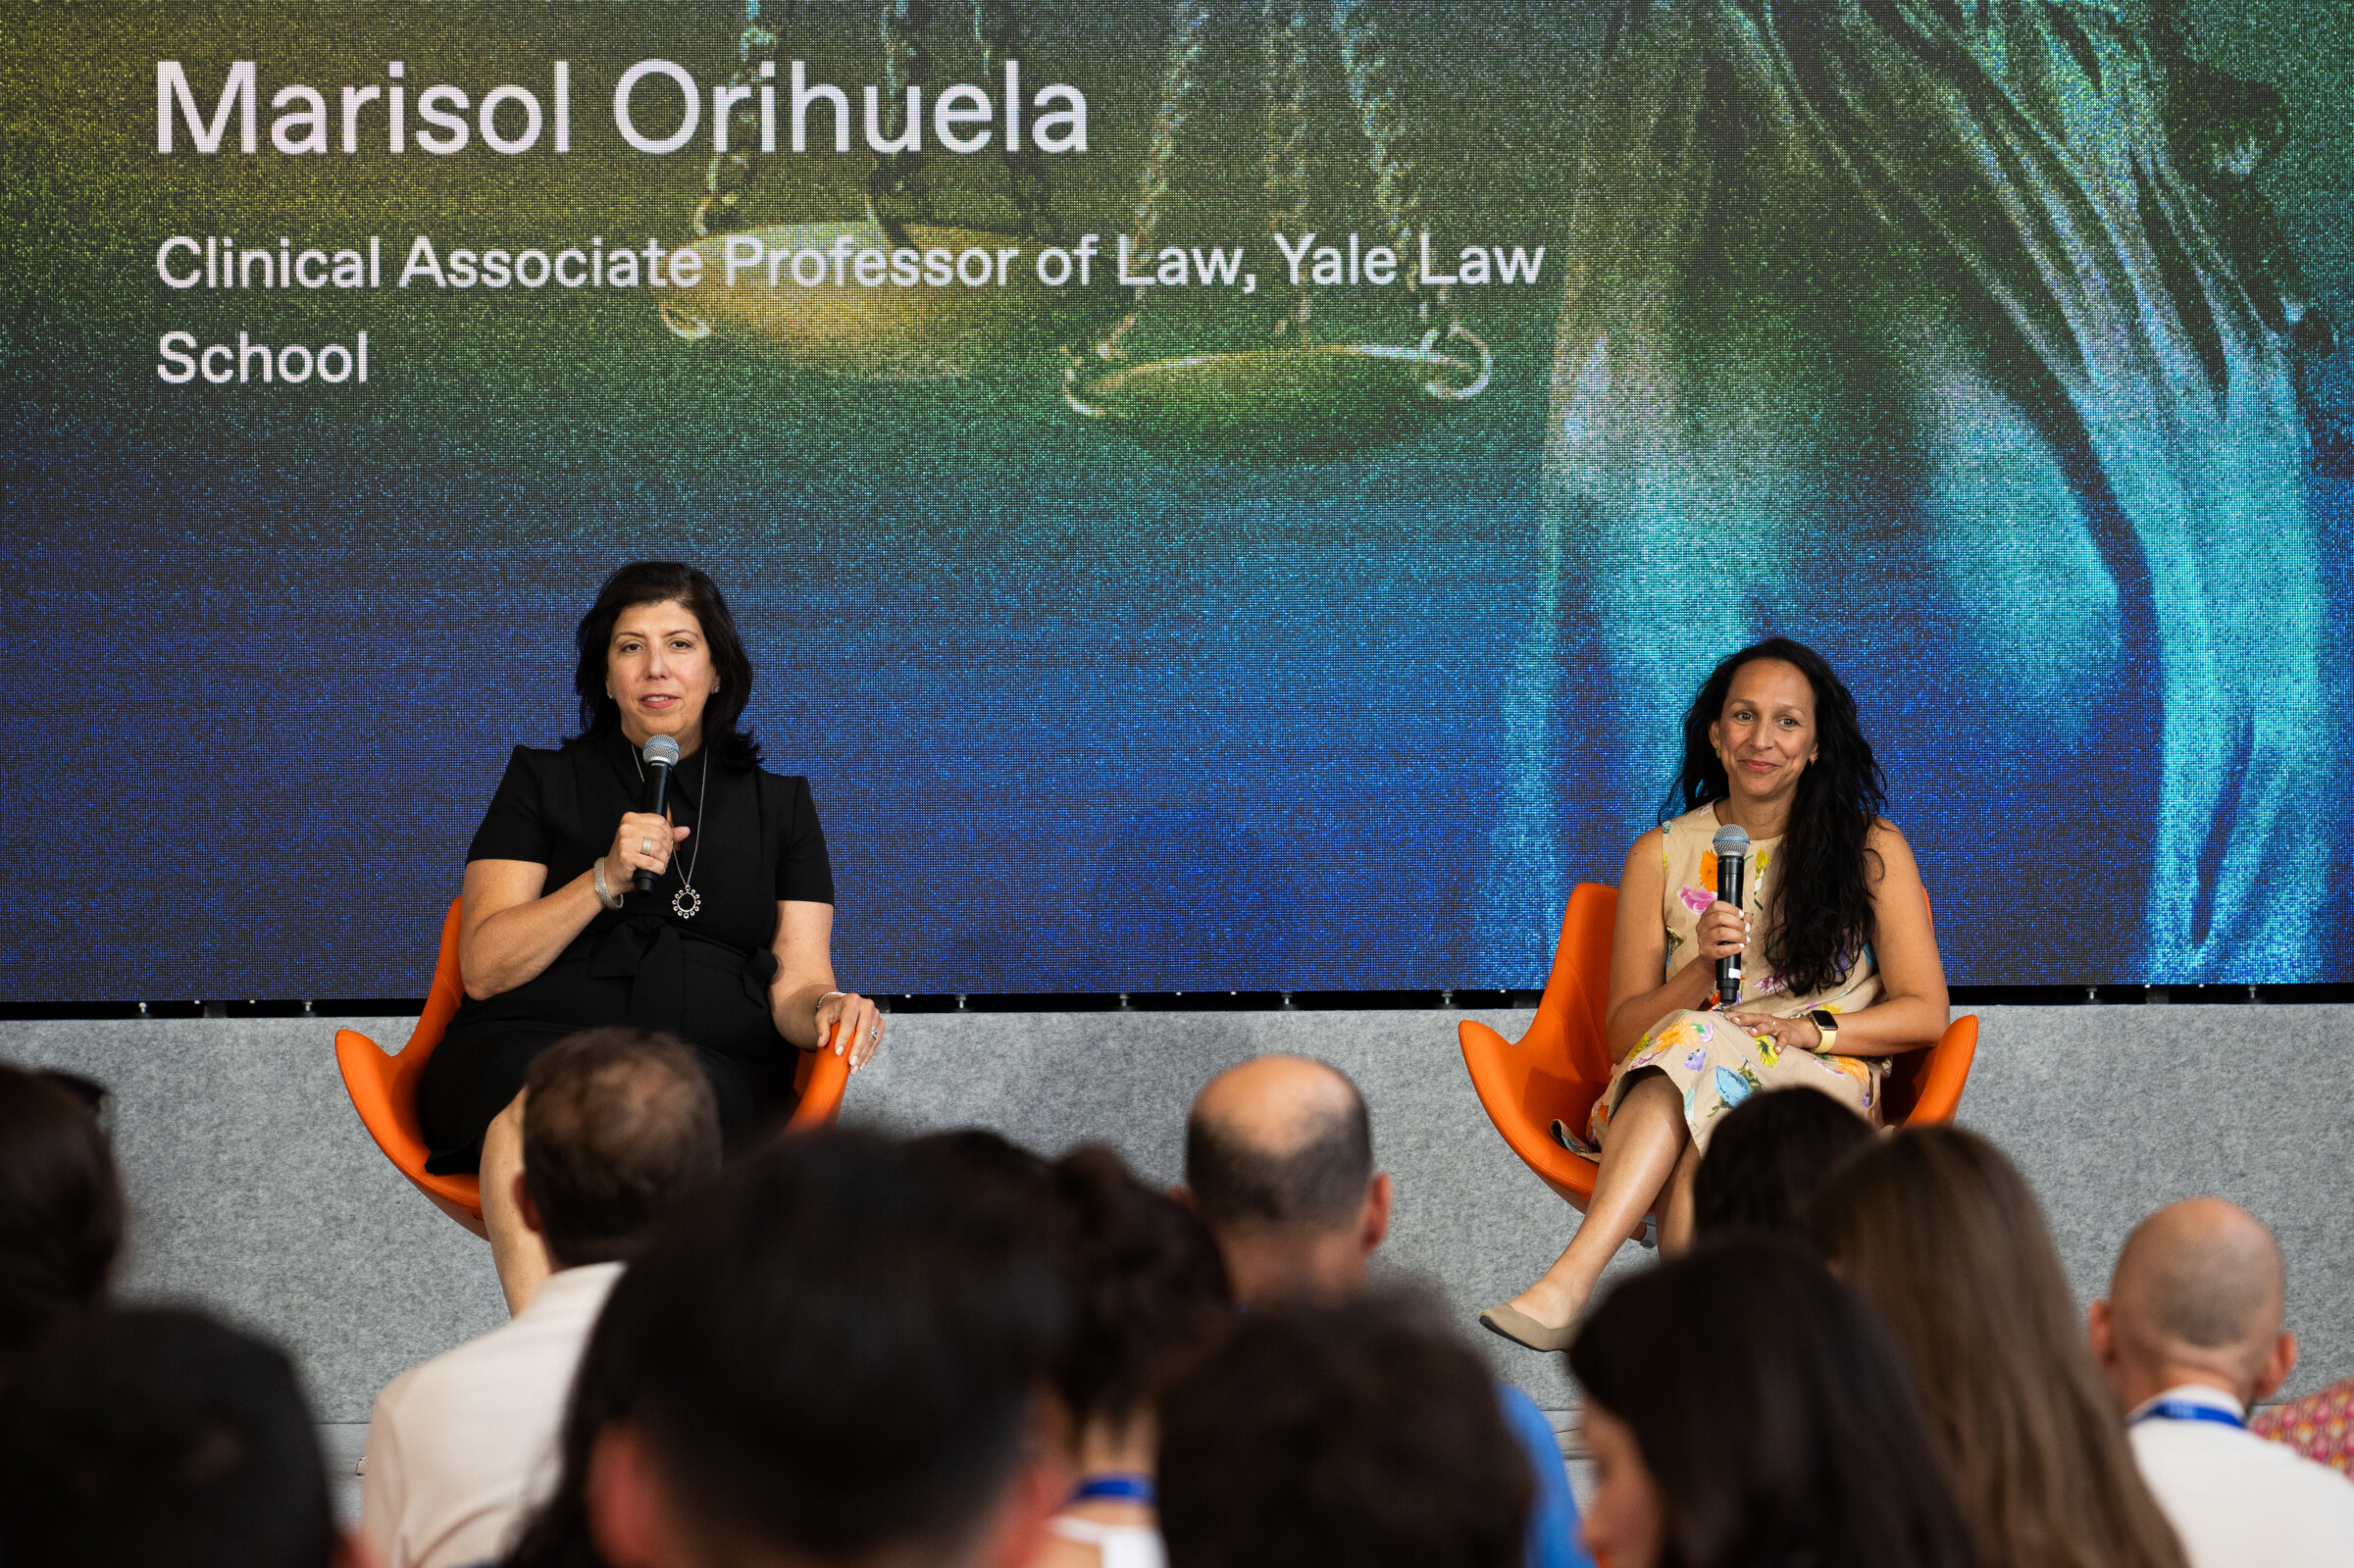 Judge Madeline Singas and Prof. Marisol Orihuela on the panel stage. They are both holding microphones while judge Singas, dressed in black, speaks. 